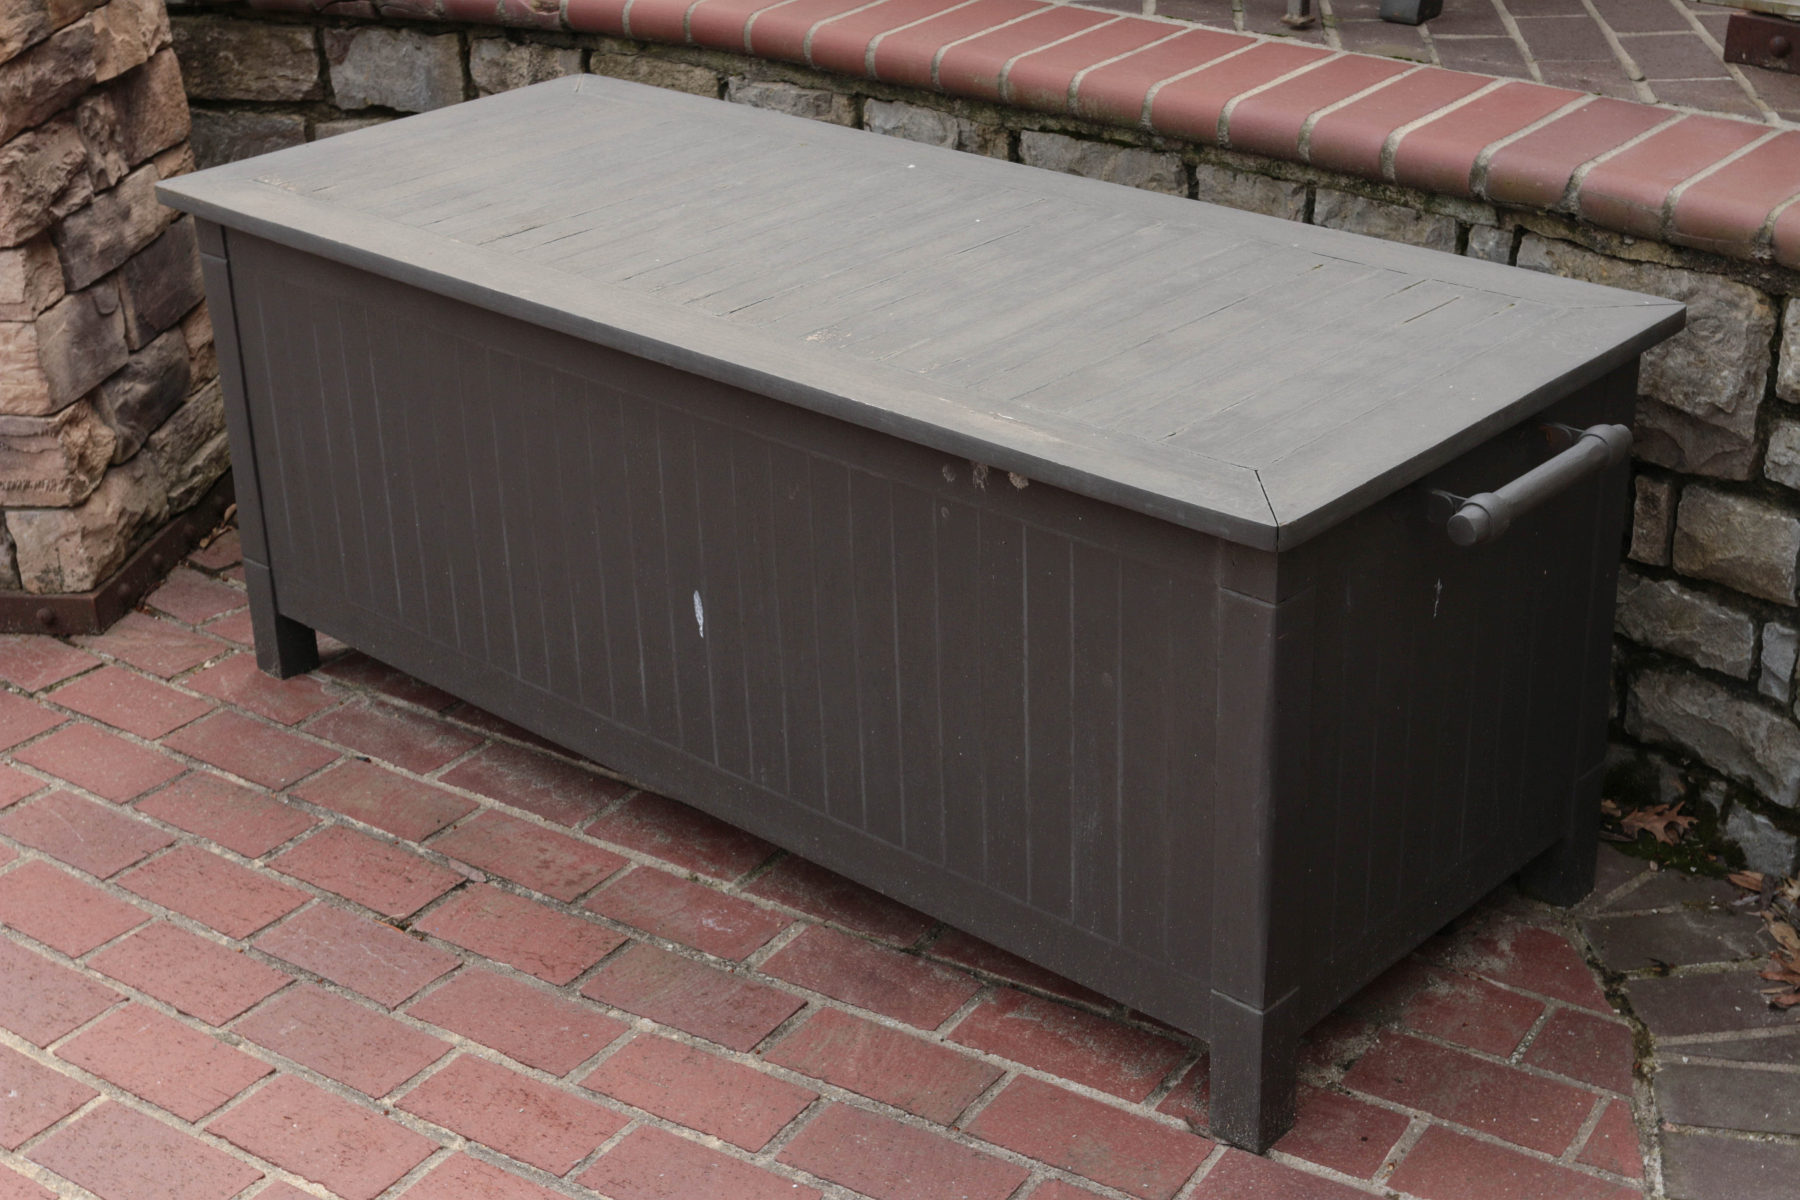 A WOOD OUTDOOR STORAGE CHEST